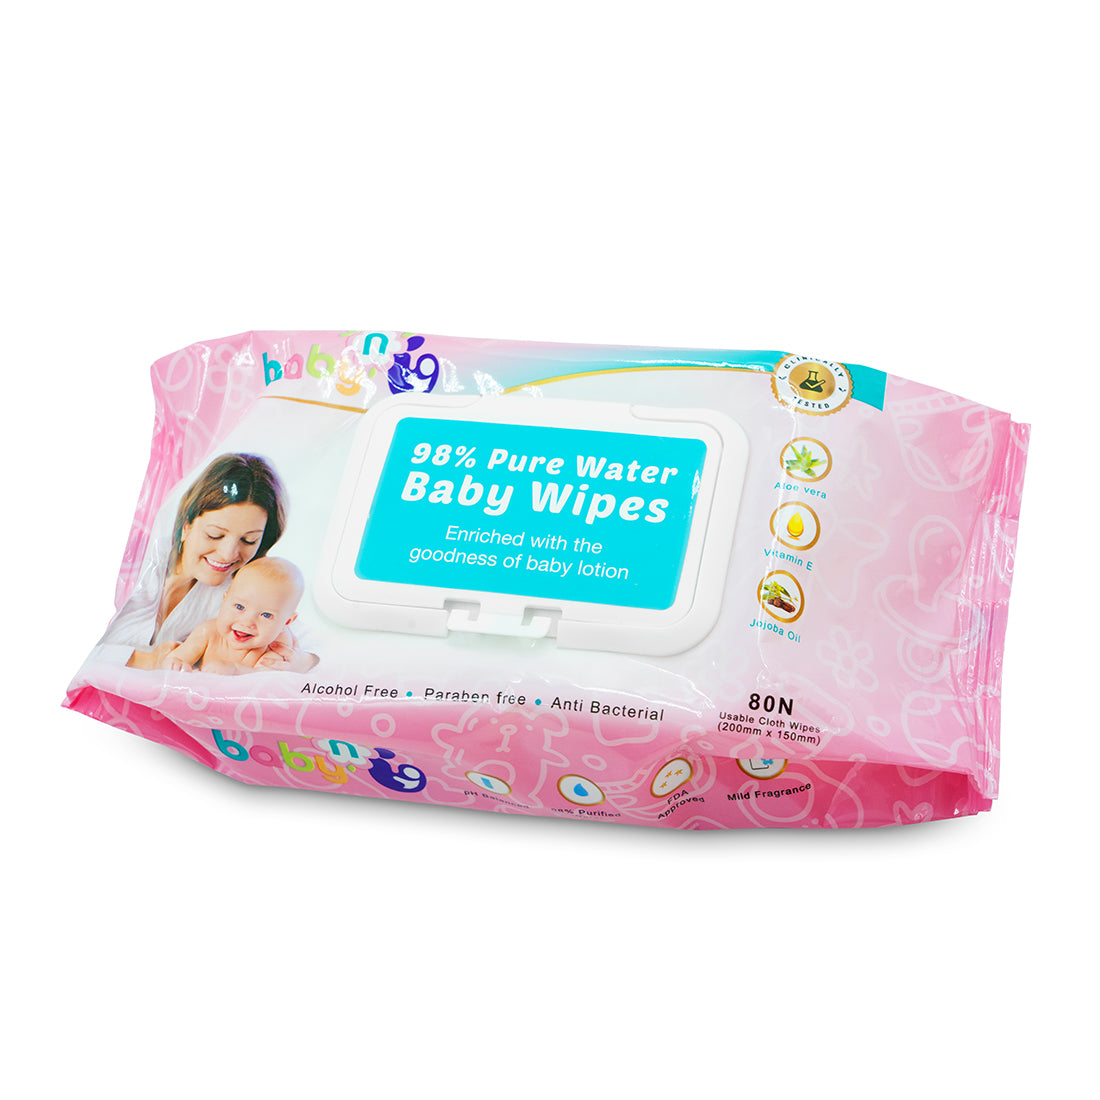 98% Pure Water Baby Wipes - Pack of 6